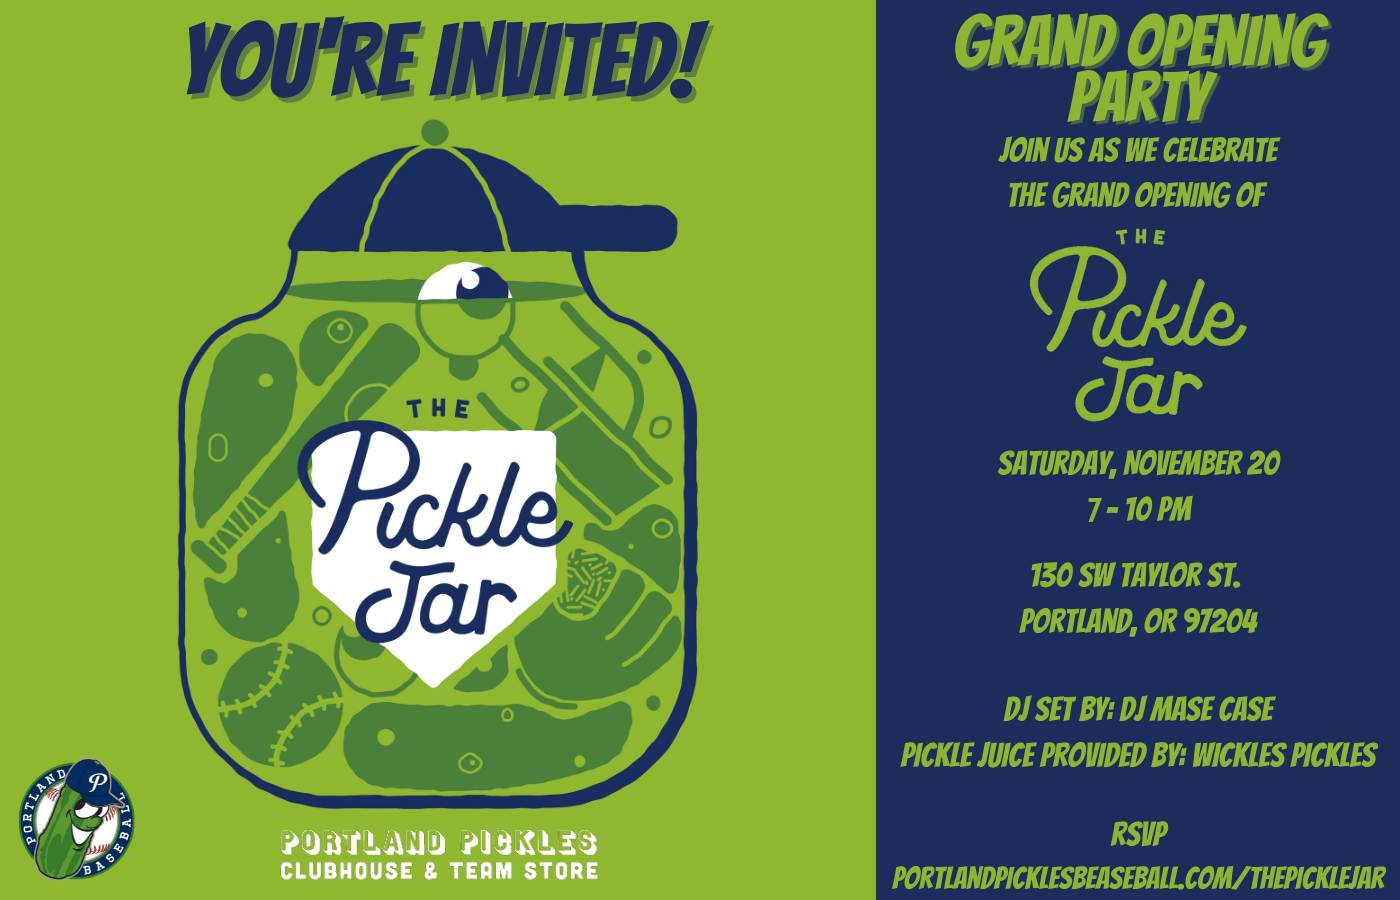 Portland Pickles to host the Grand Opening of The Pickle Jar in downtown Portland.